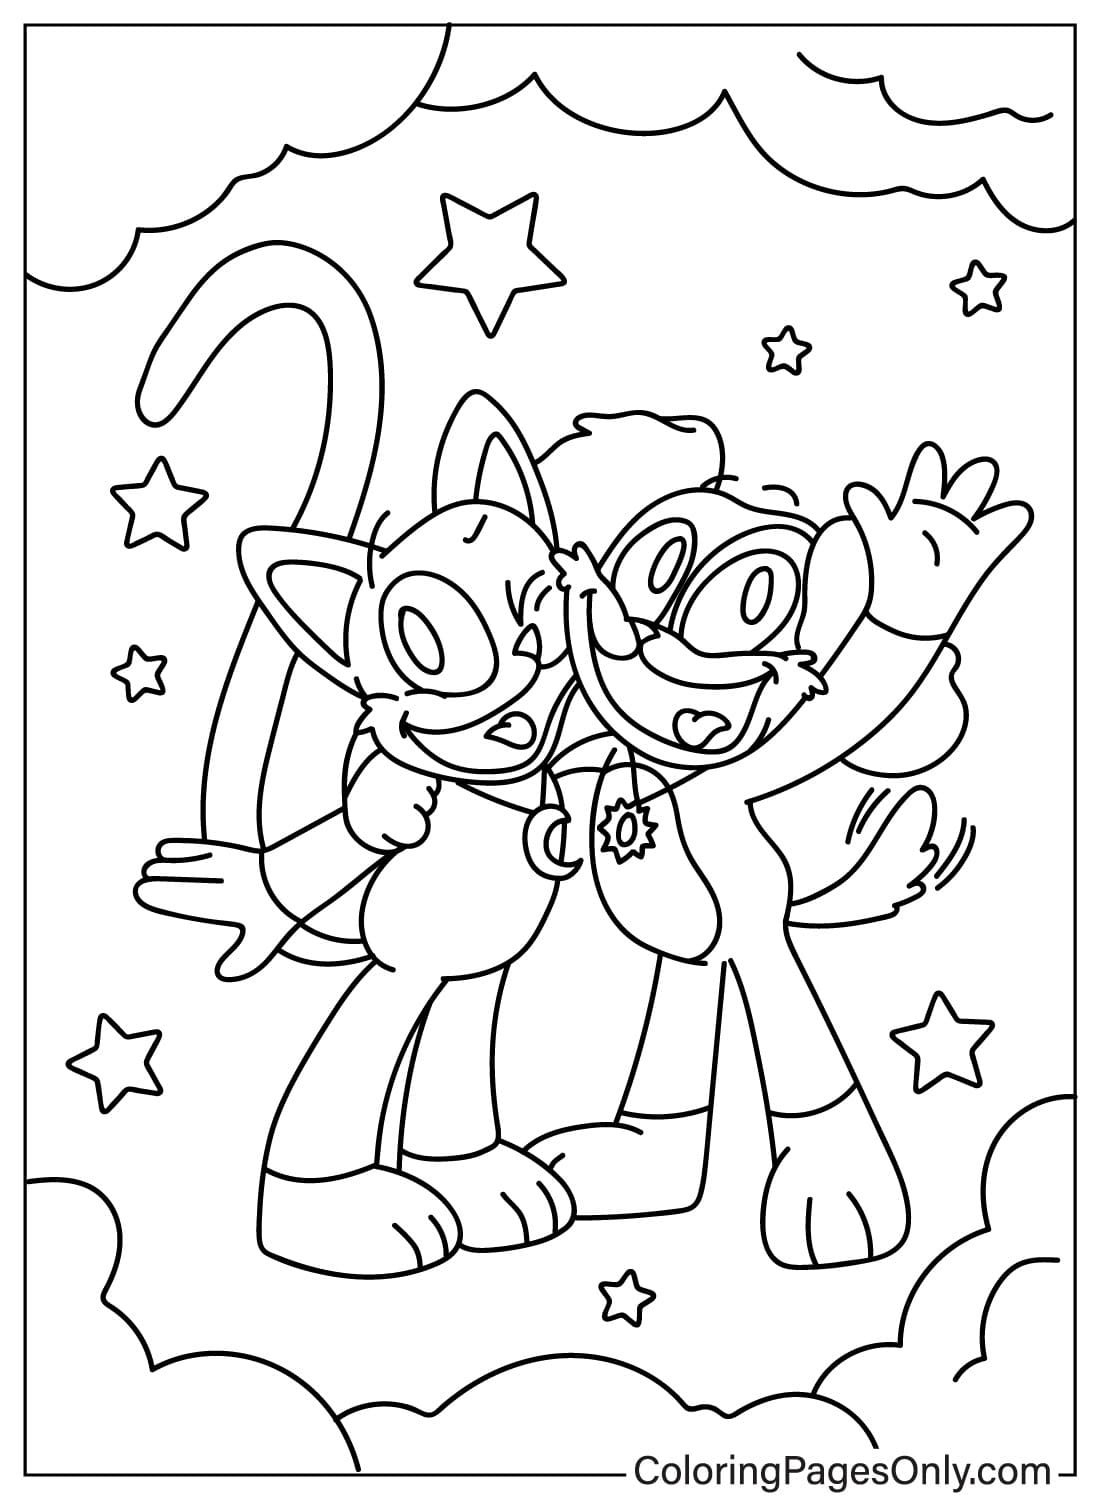 CatNap, DogDay Coloring Page from DogDay